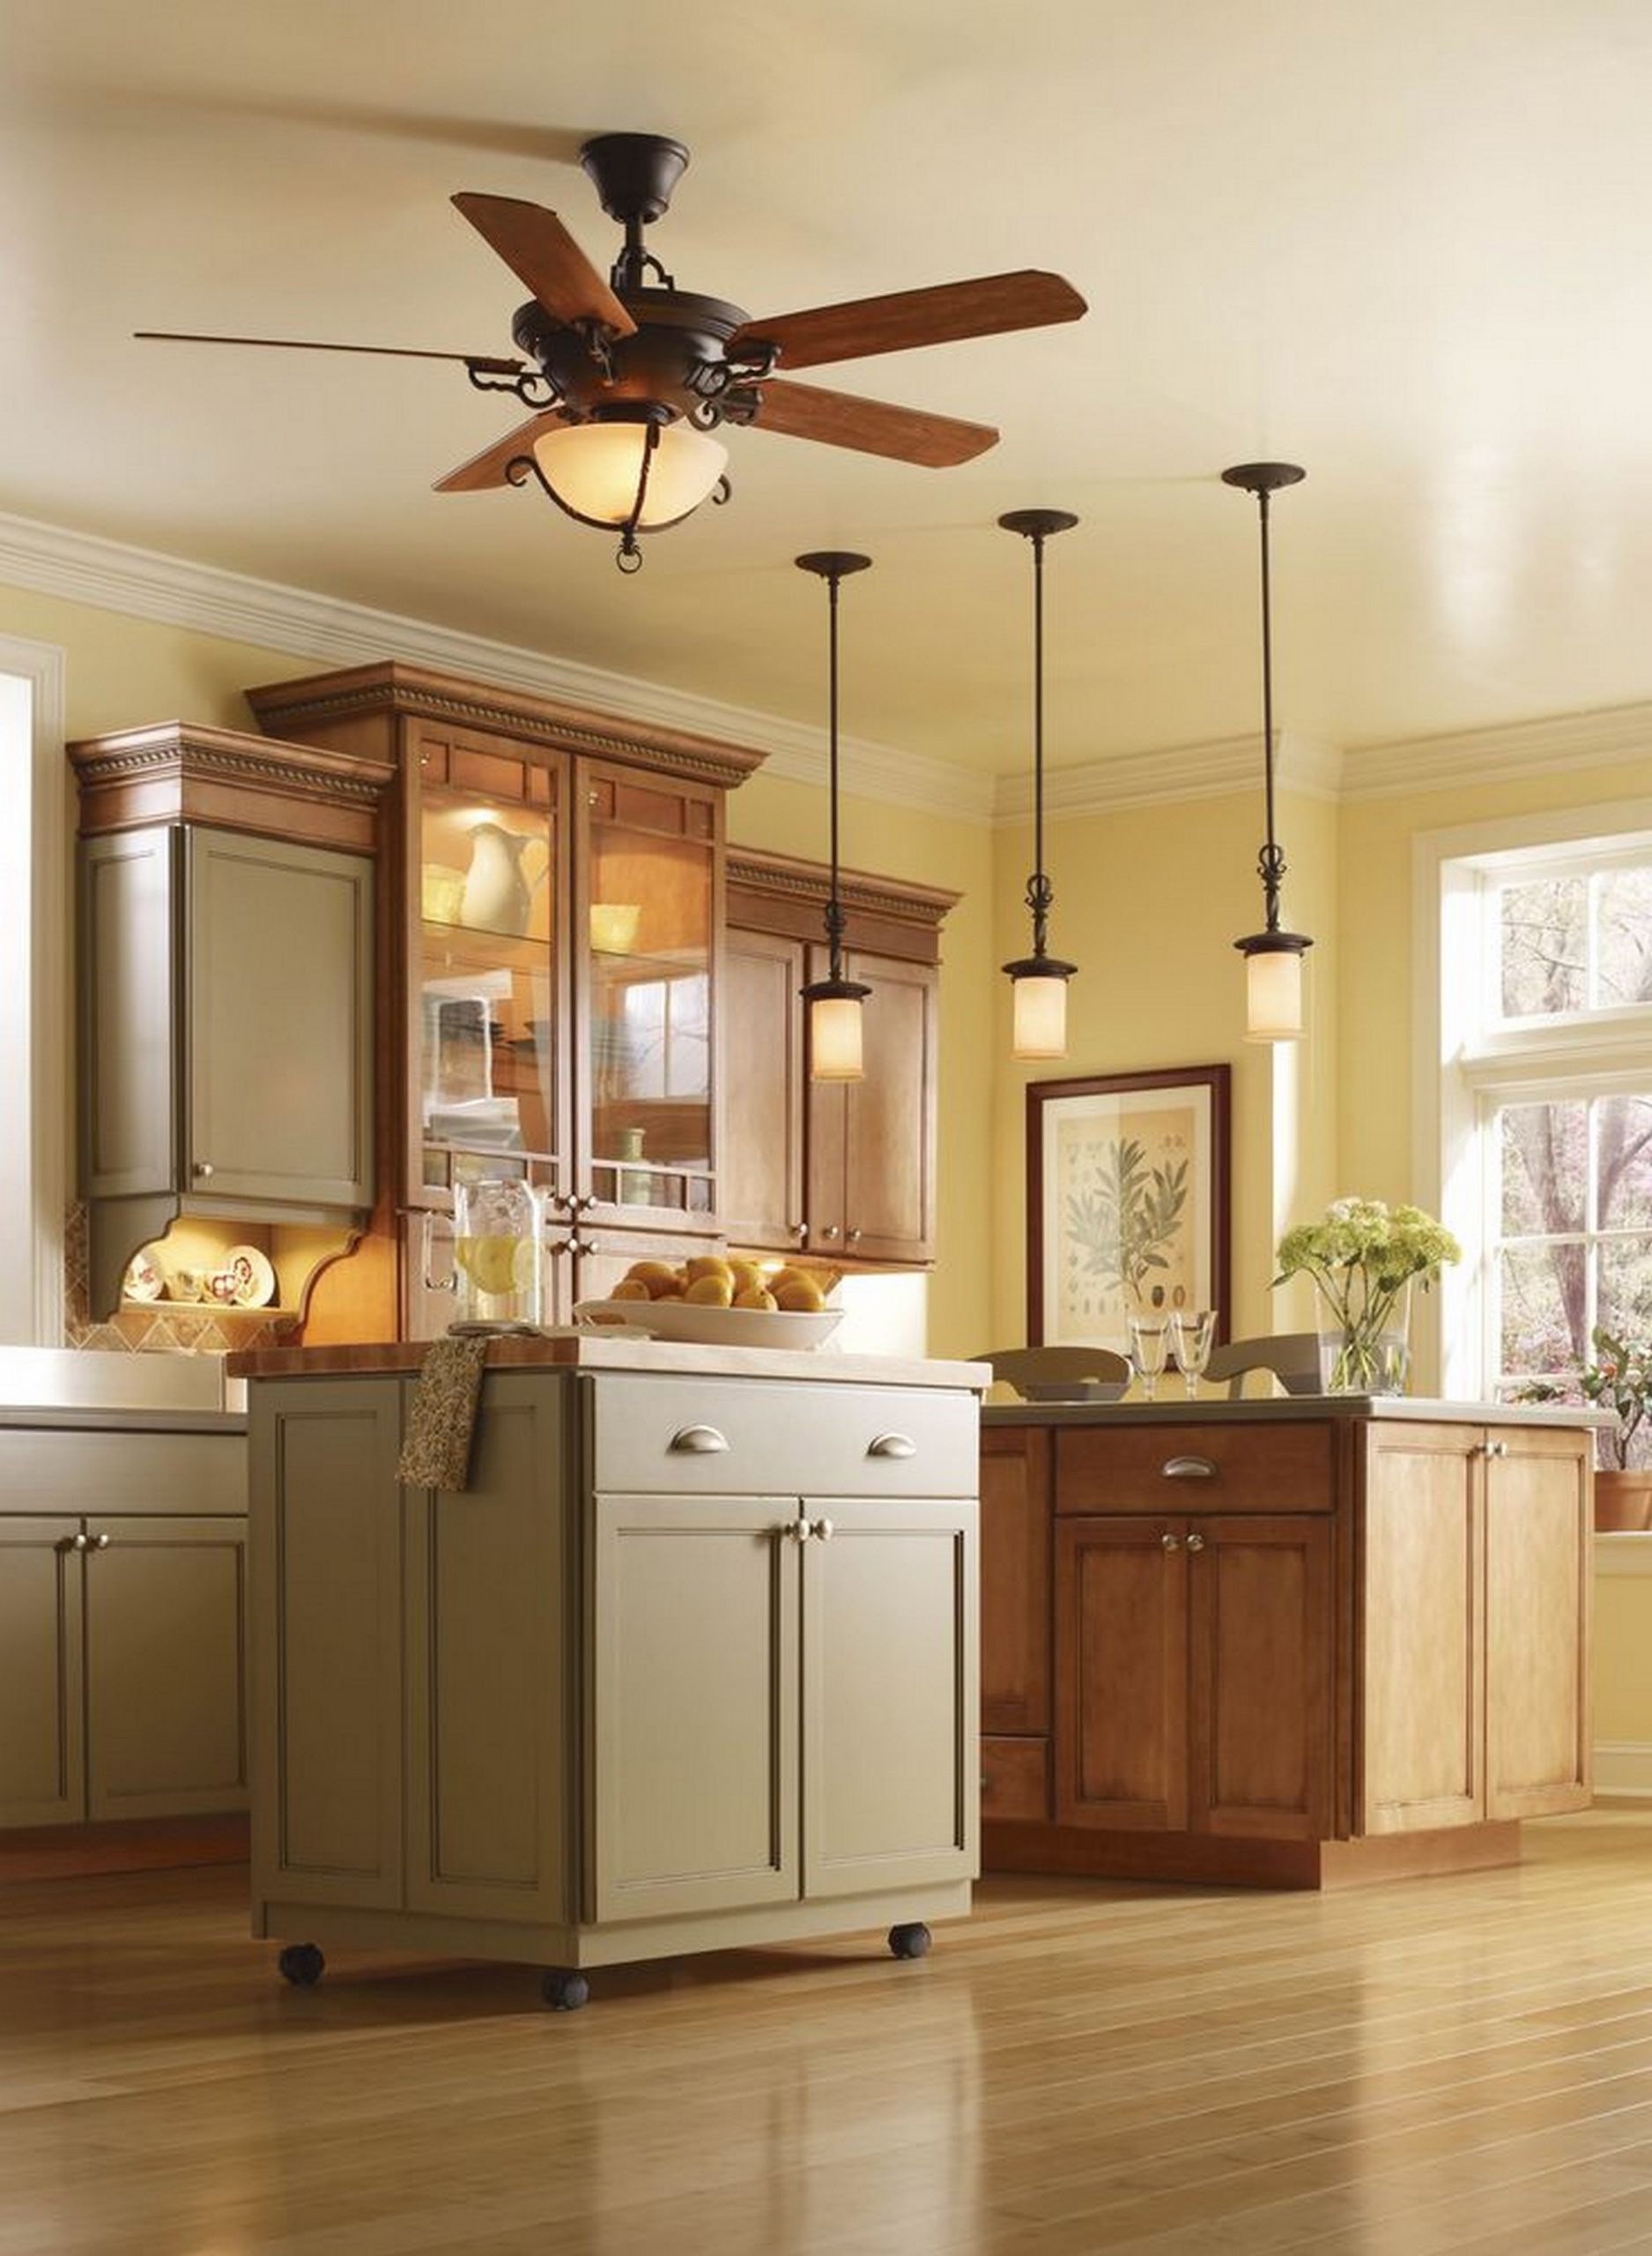 Kitchen Fan With Lights
 10 Tips To Help You Get the Right Ceiling fan for kitchen